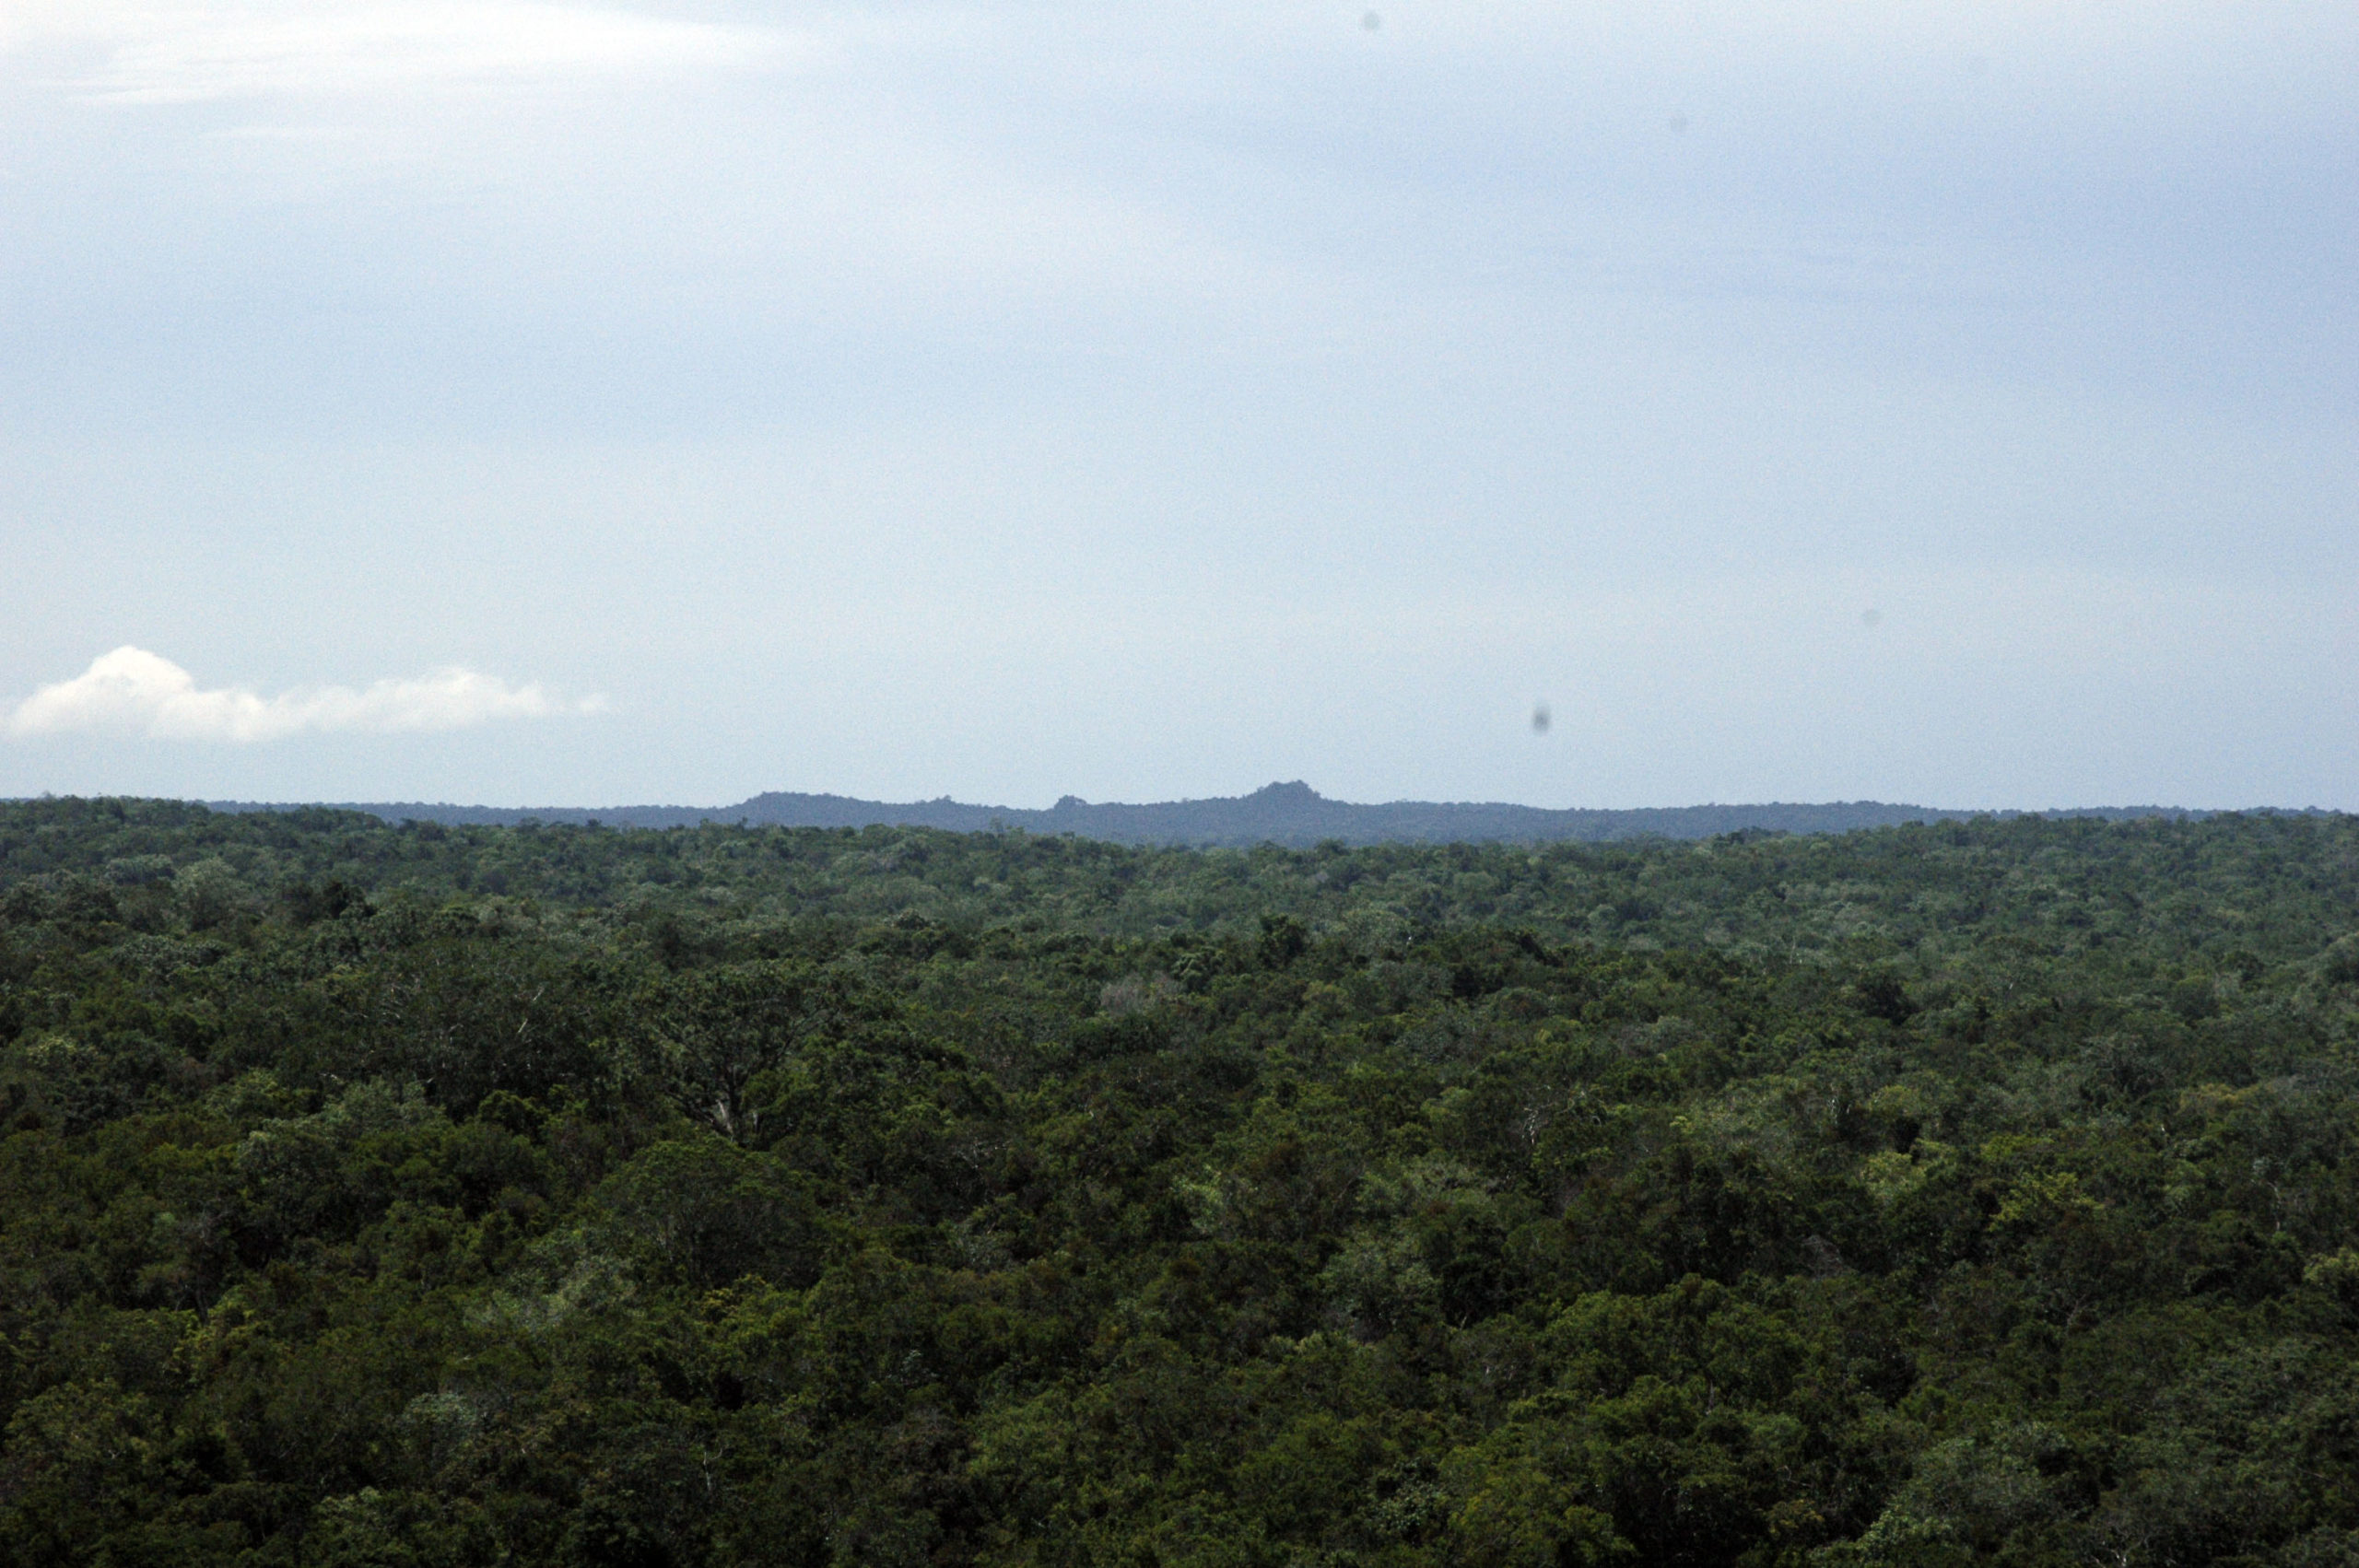 The photograph shows the green dense forest surrounding the Preclassic site of Nakbé which can be seen in the horizon from El Mirador’s La Danta pyramid. 